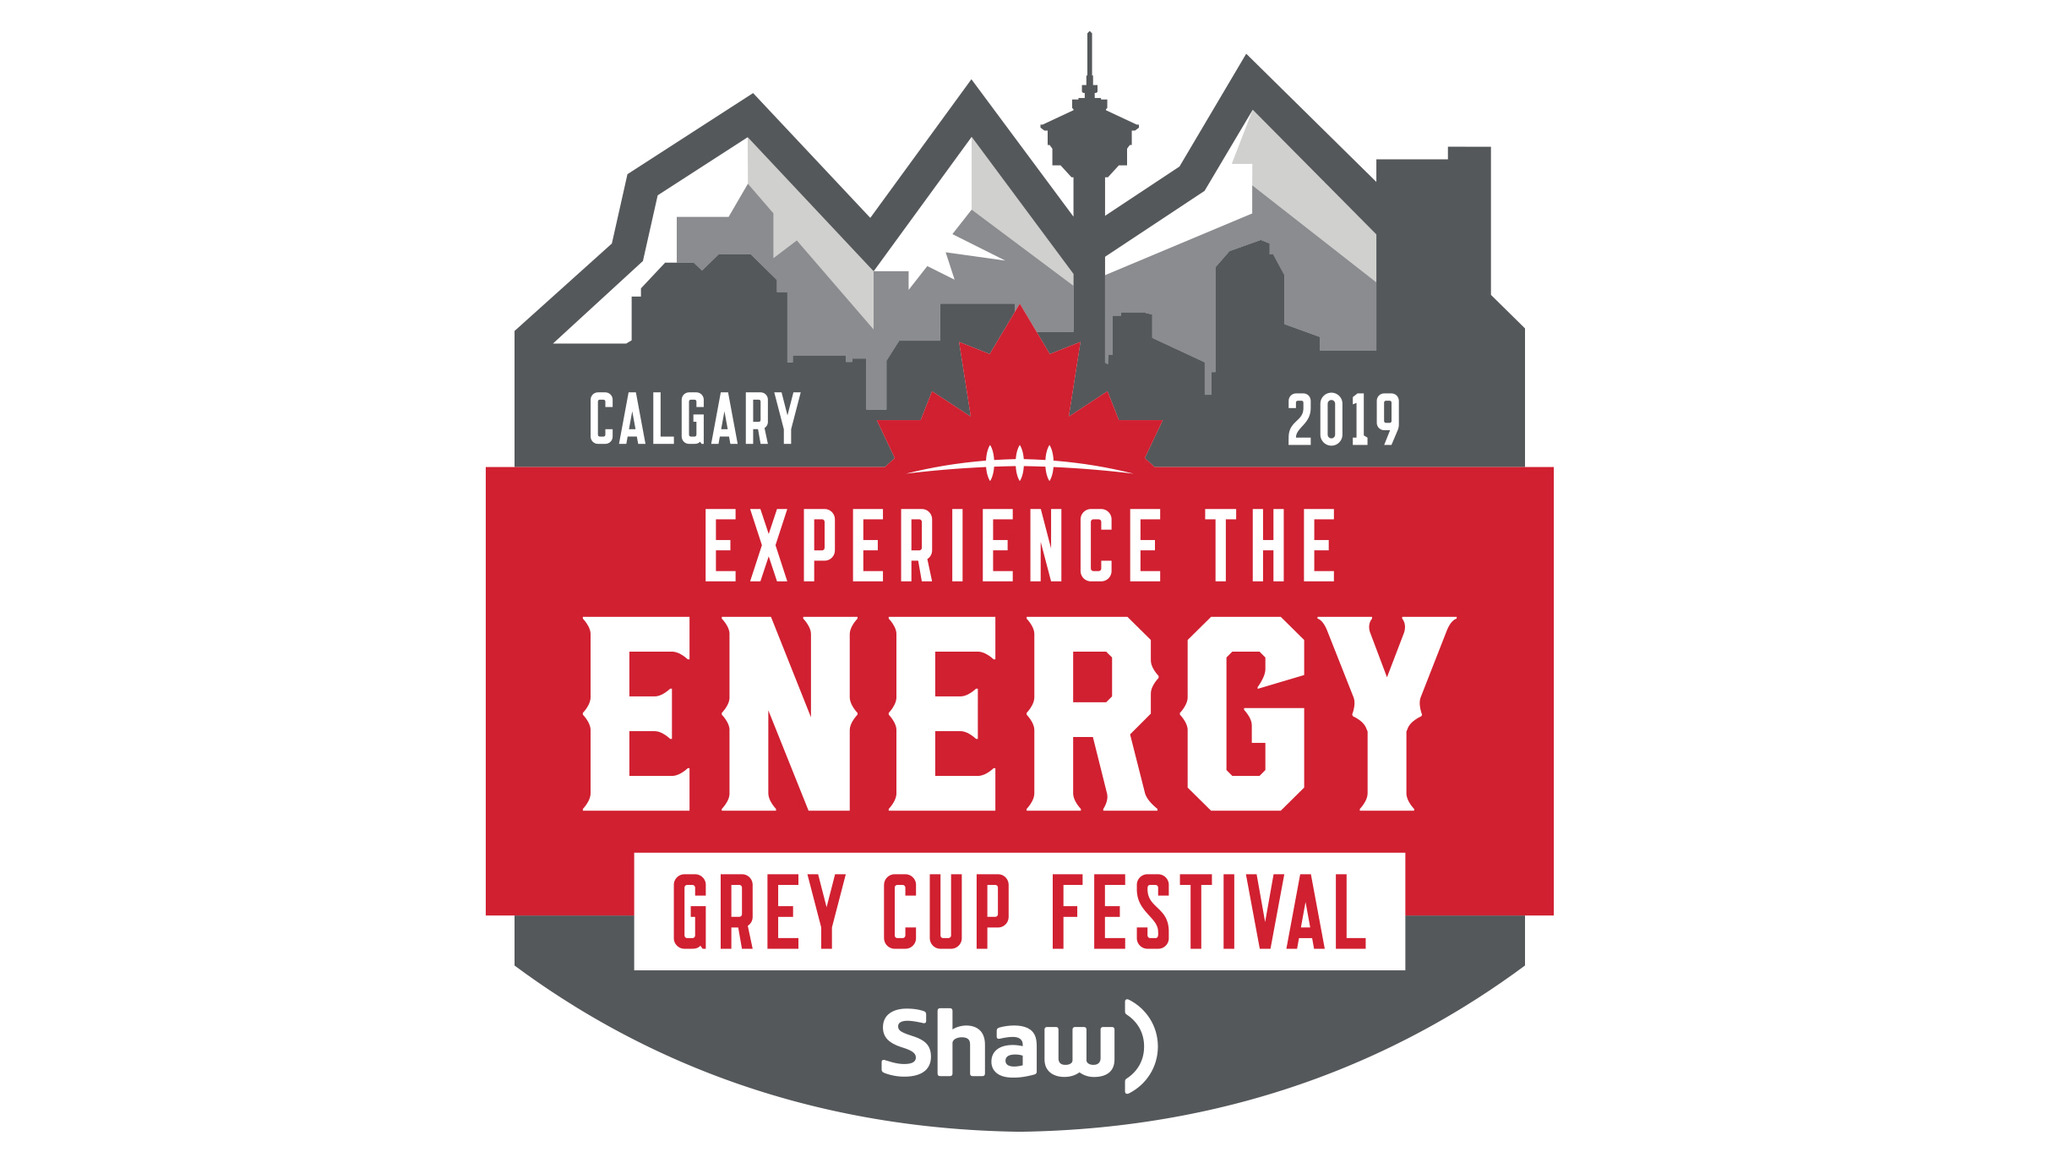 Grey Cup Festival Tickets Single Game Tickets & Schedule